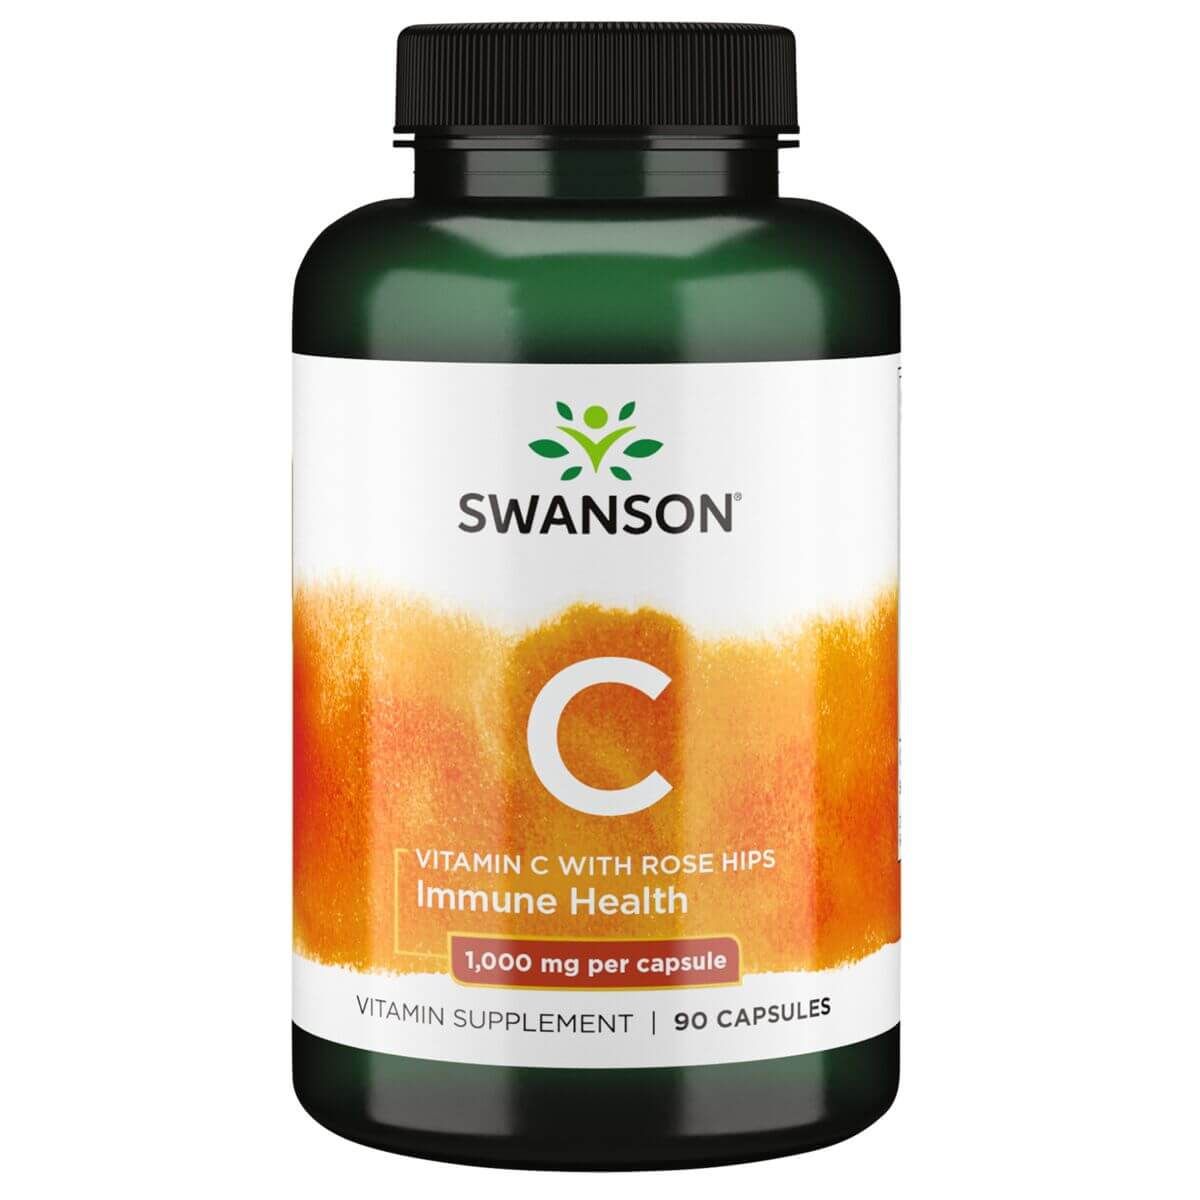 Photos - Vitamins & Minerals Swanson Vitamin C with Rose Hips 1,000 mg 90 Capsules PBW-P31512 